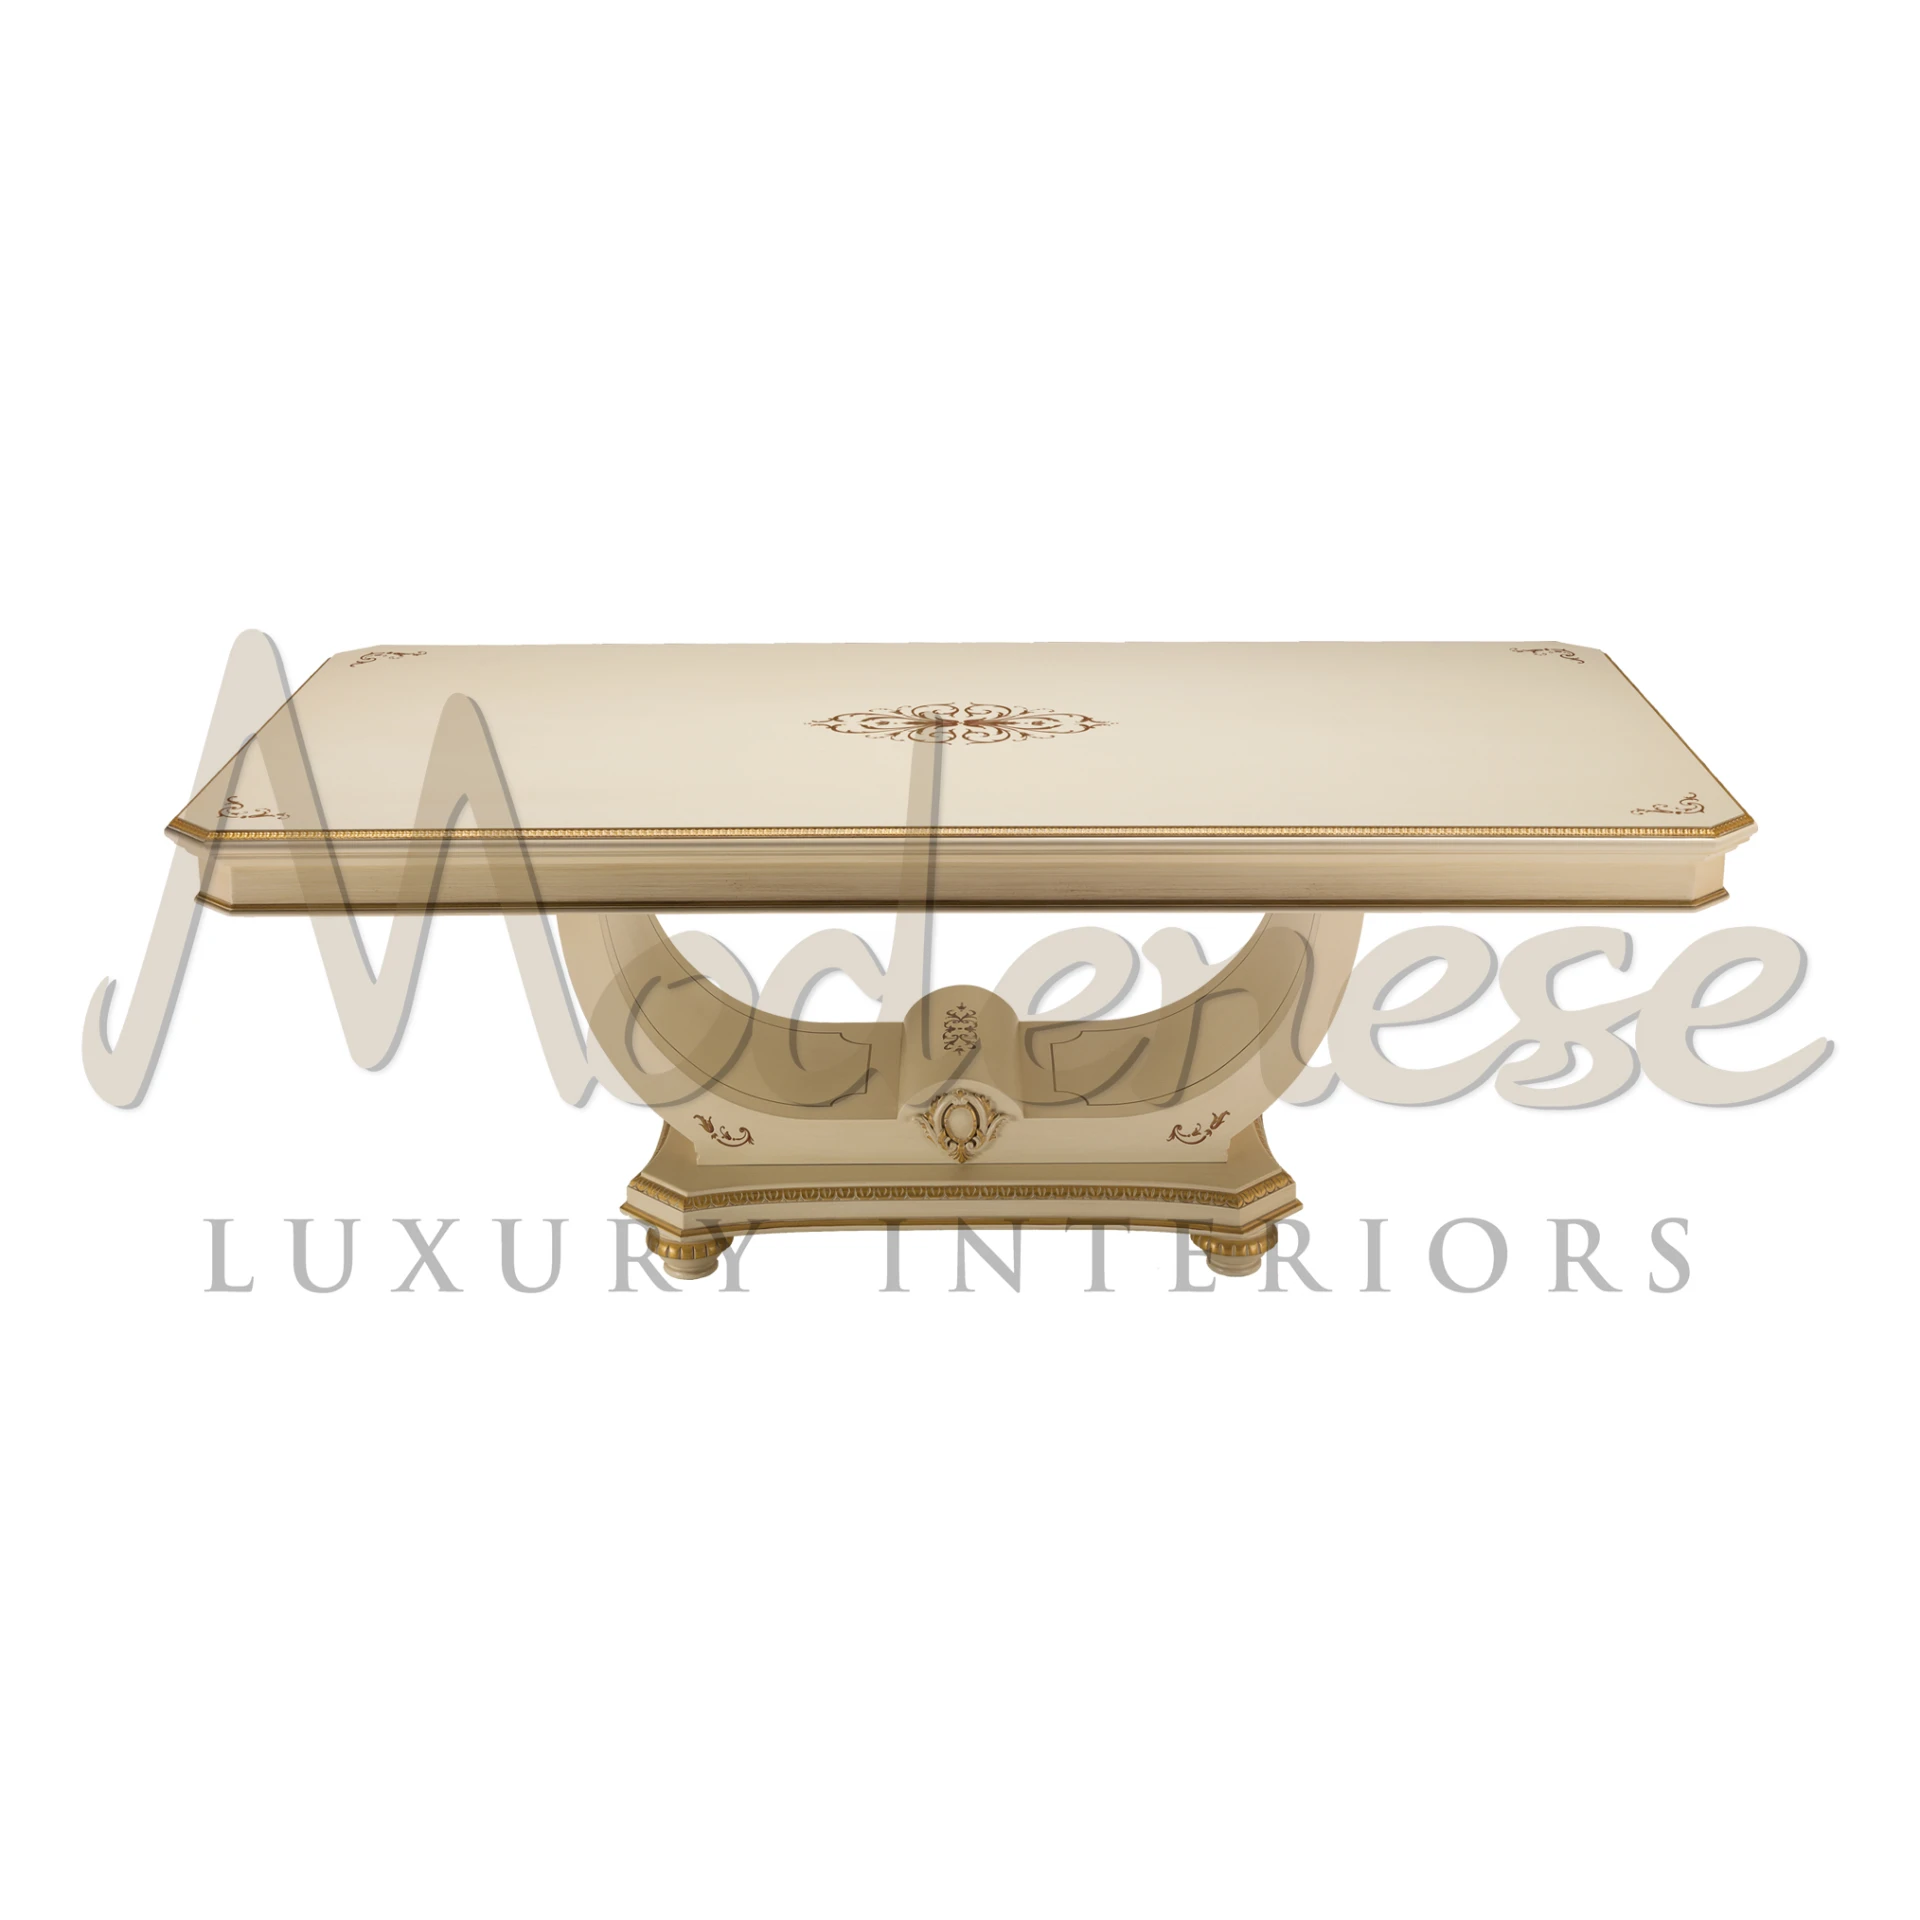 Rectangular Baroque Style Dining Table for luxurious dining experience.